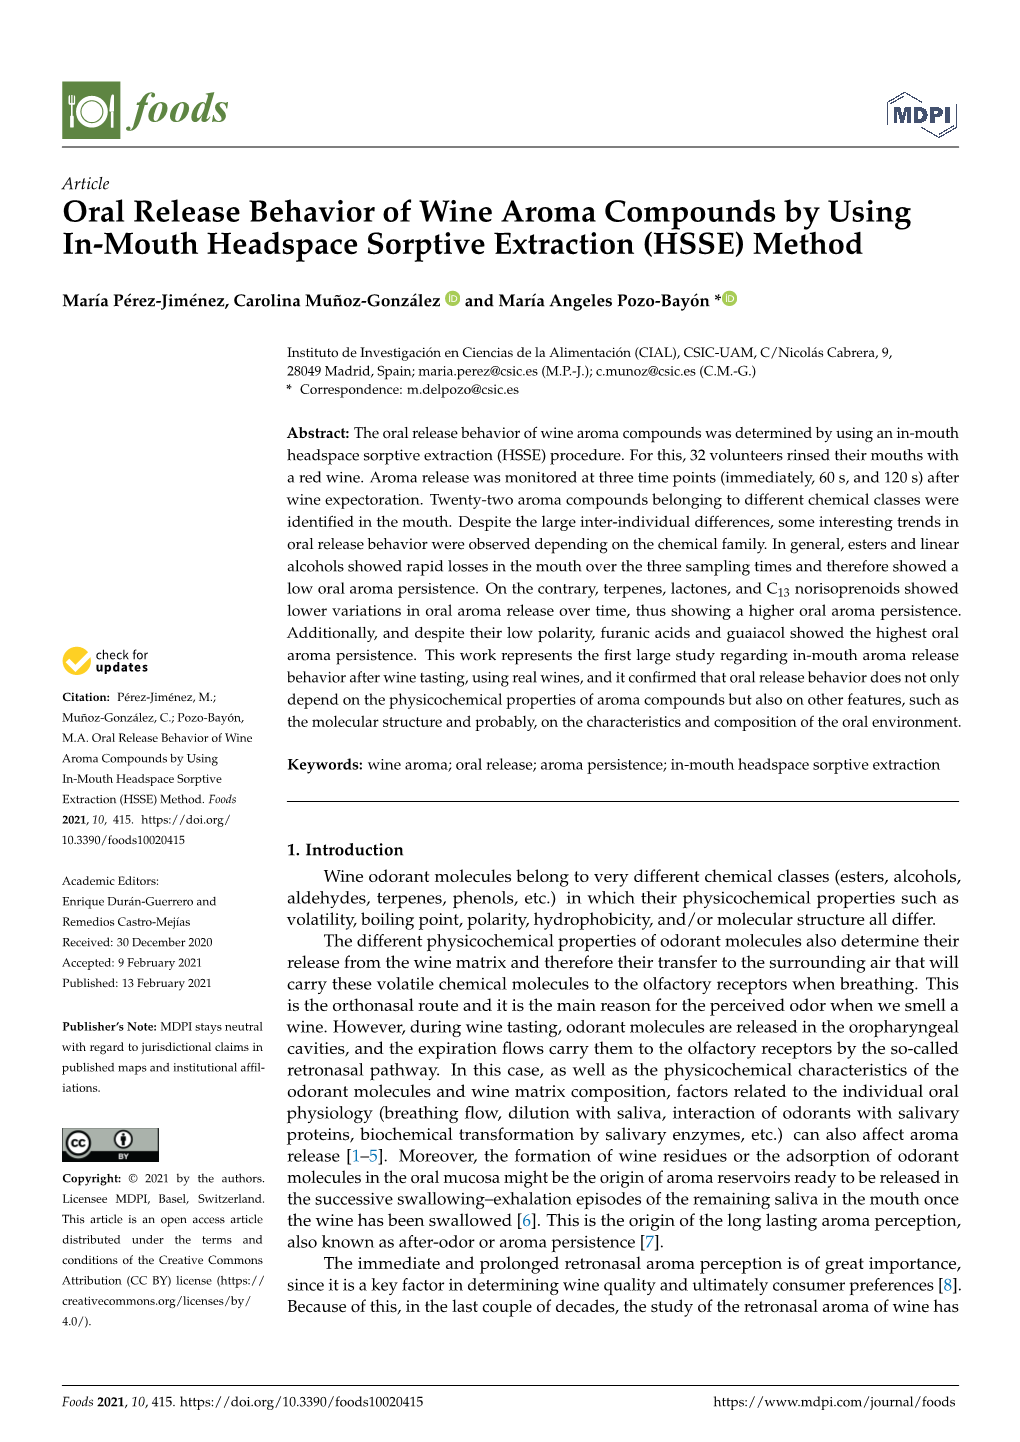 Oral Release Behavior of Wine Aroma Compounds by Using In-Mouth Headspace Sorptive Extraction (HSSE) Method